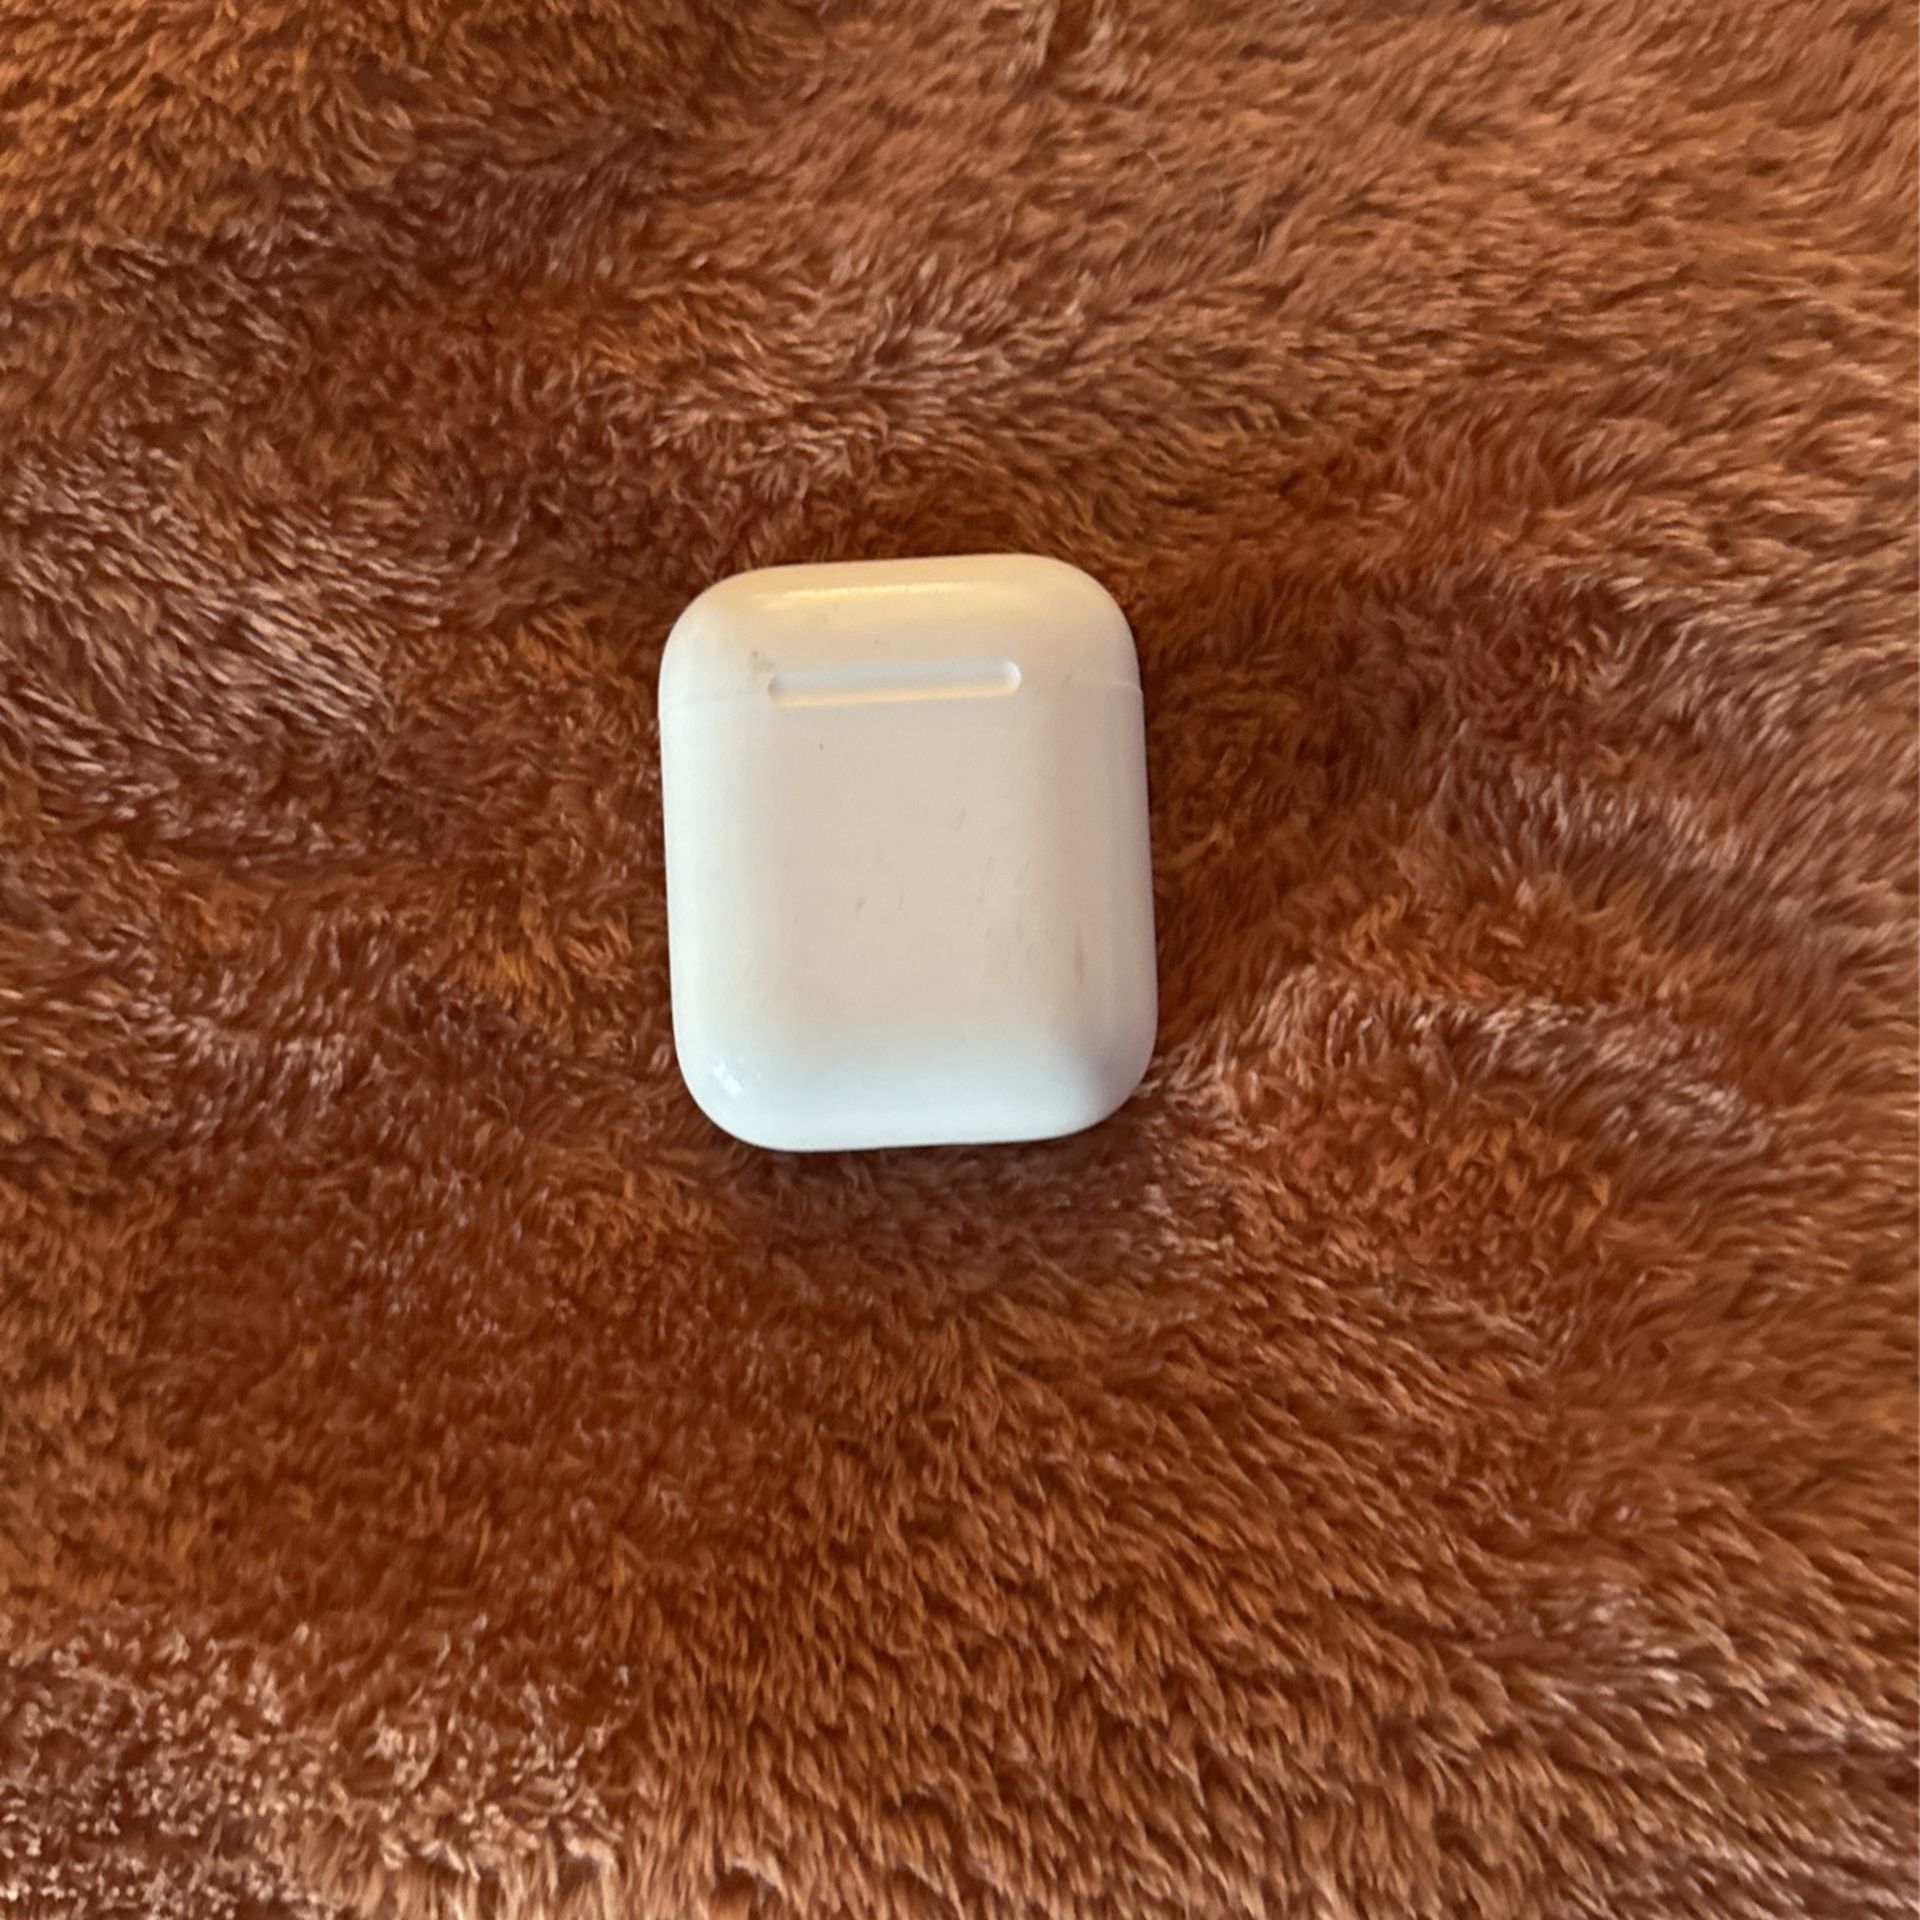 Used AirPods 